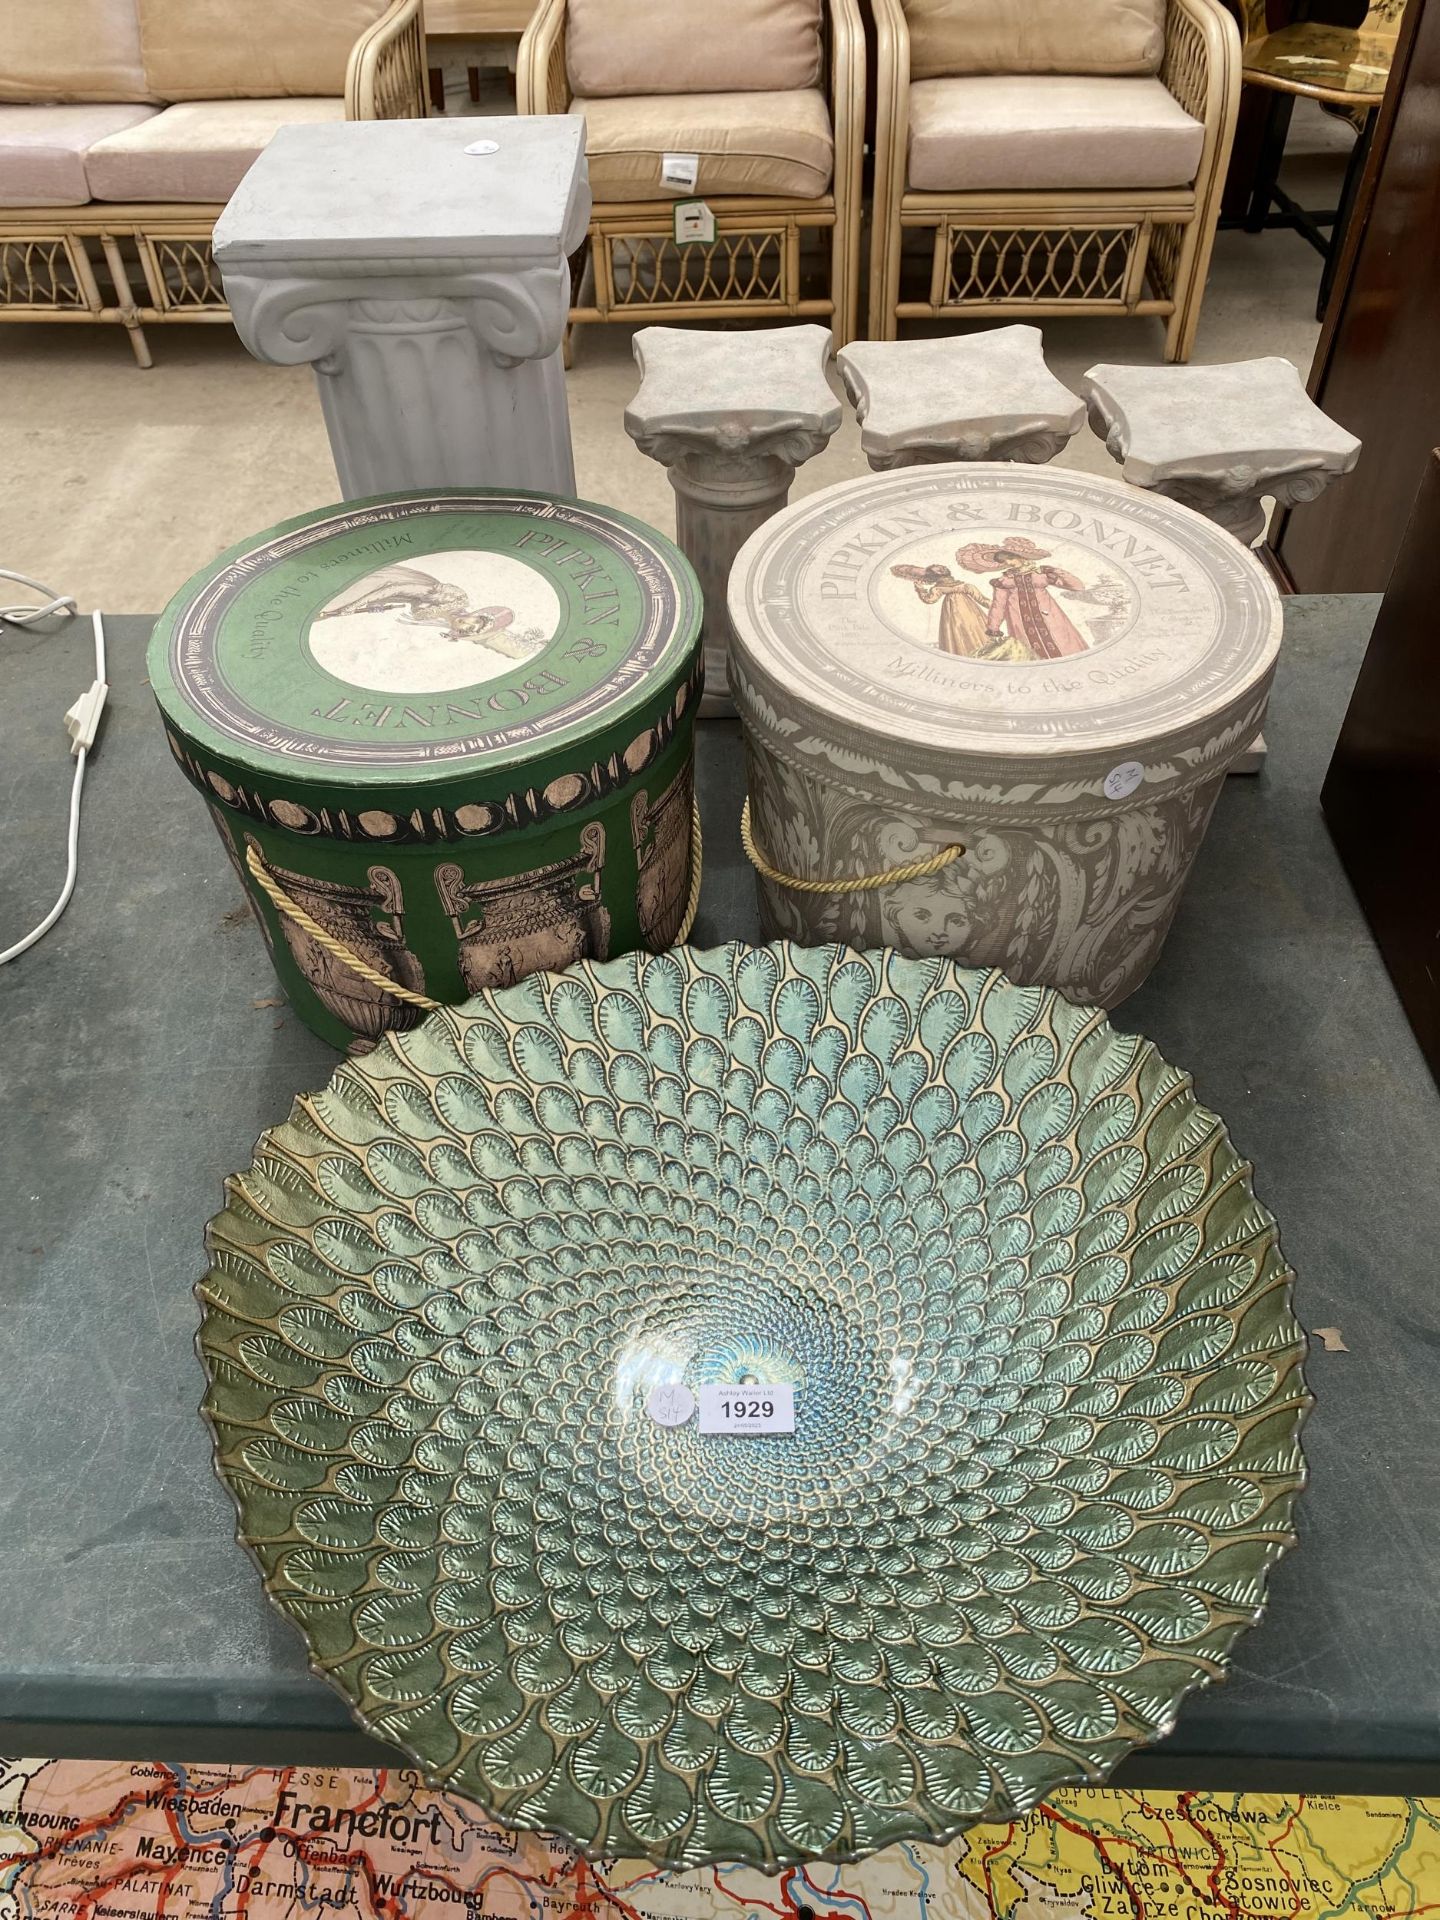 A DECORATIVE GLASS BOWL, HAT BOXES AND FOUR COLUMN STANDS